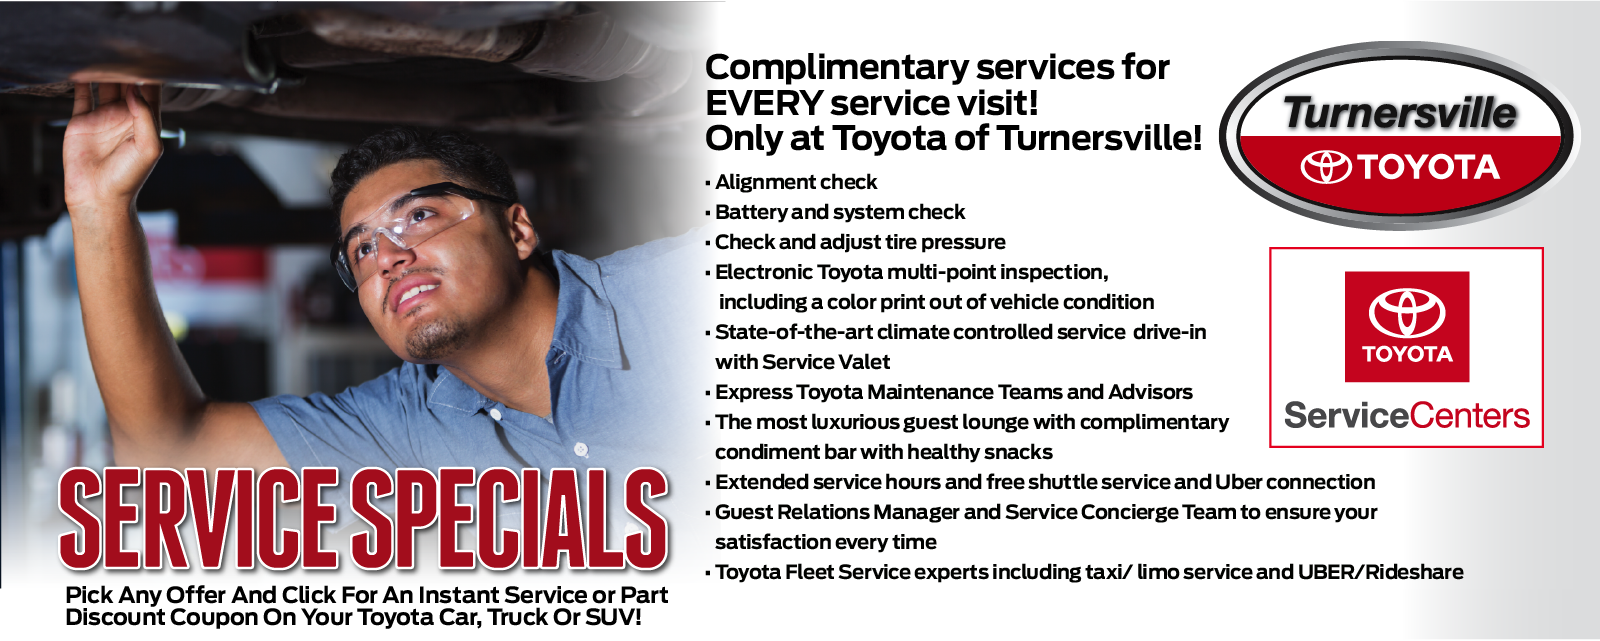 Complimentary services for EVERY service visit! Only at Toyota of Turnersville!